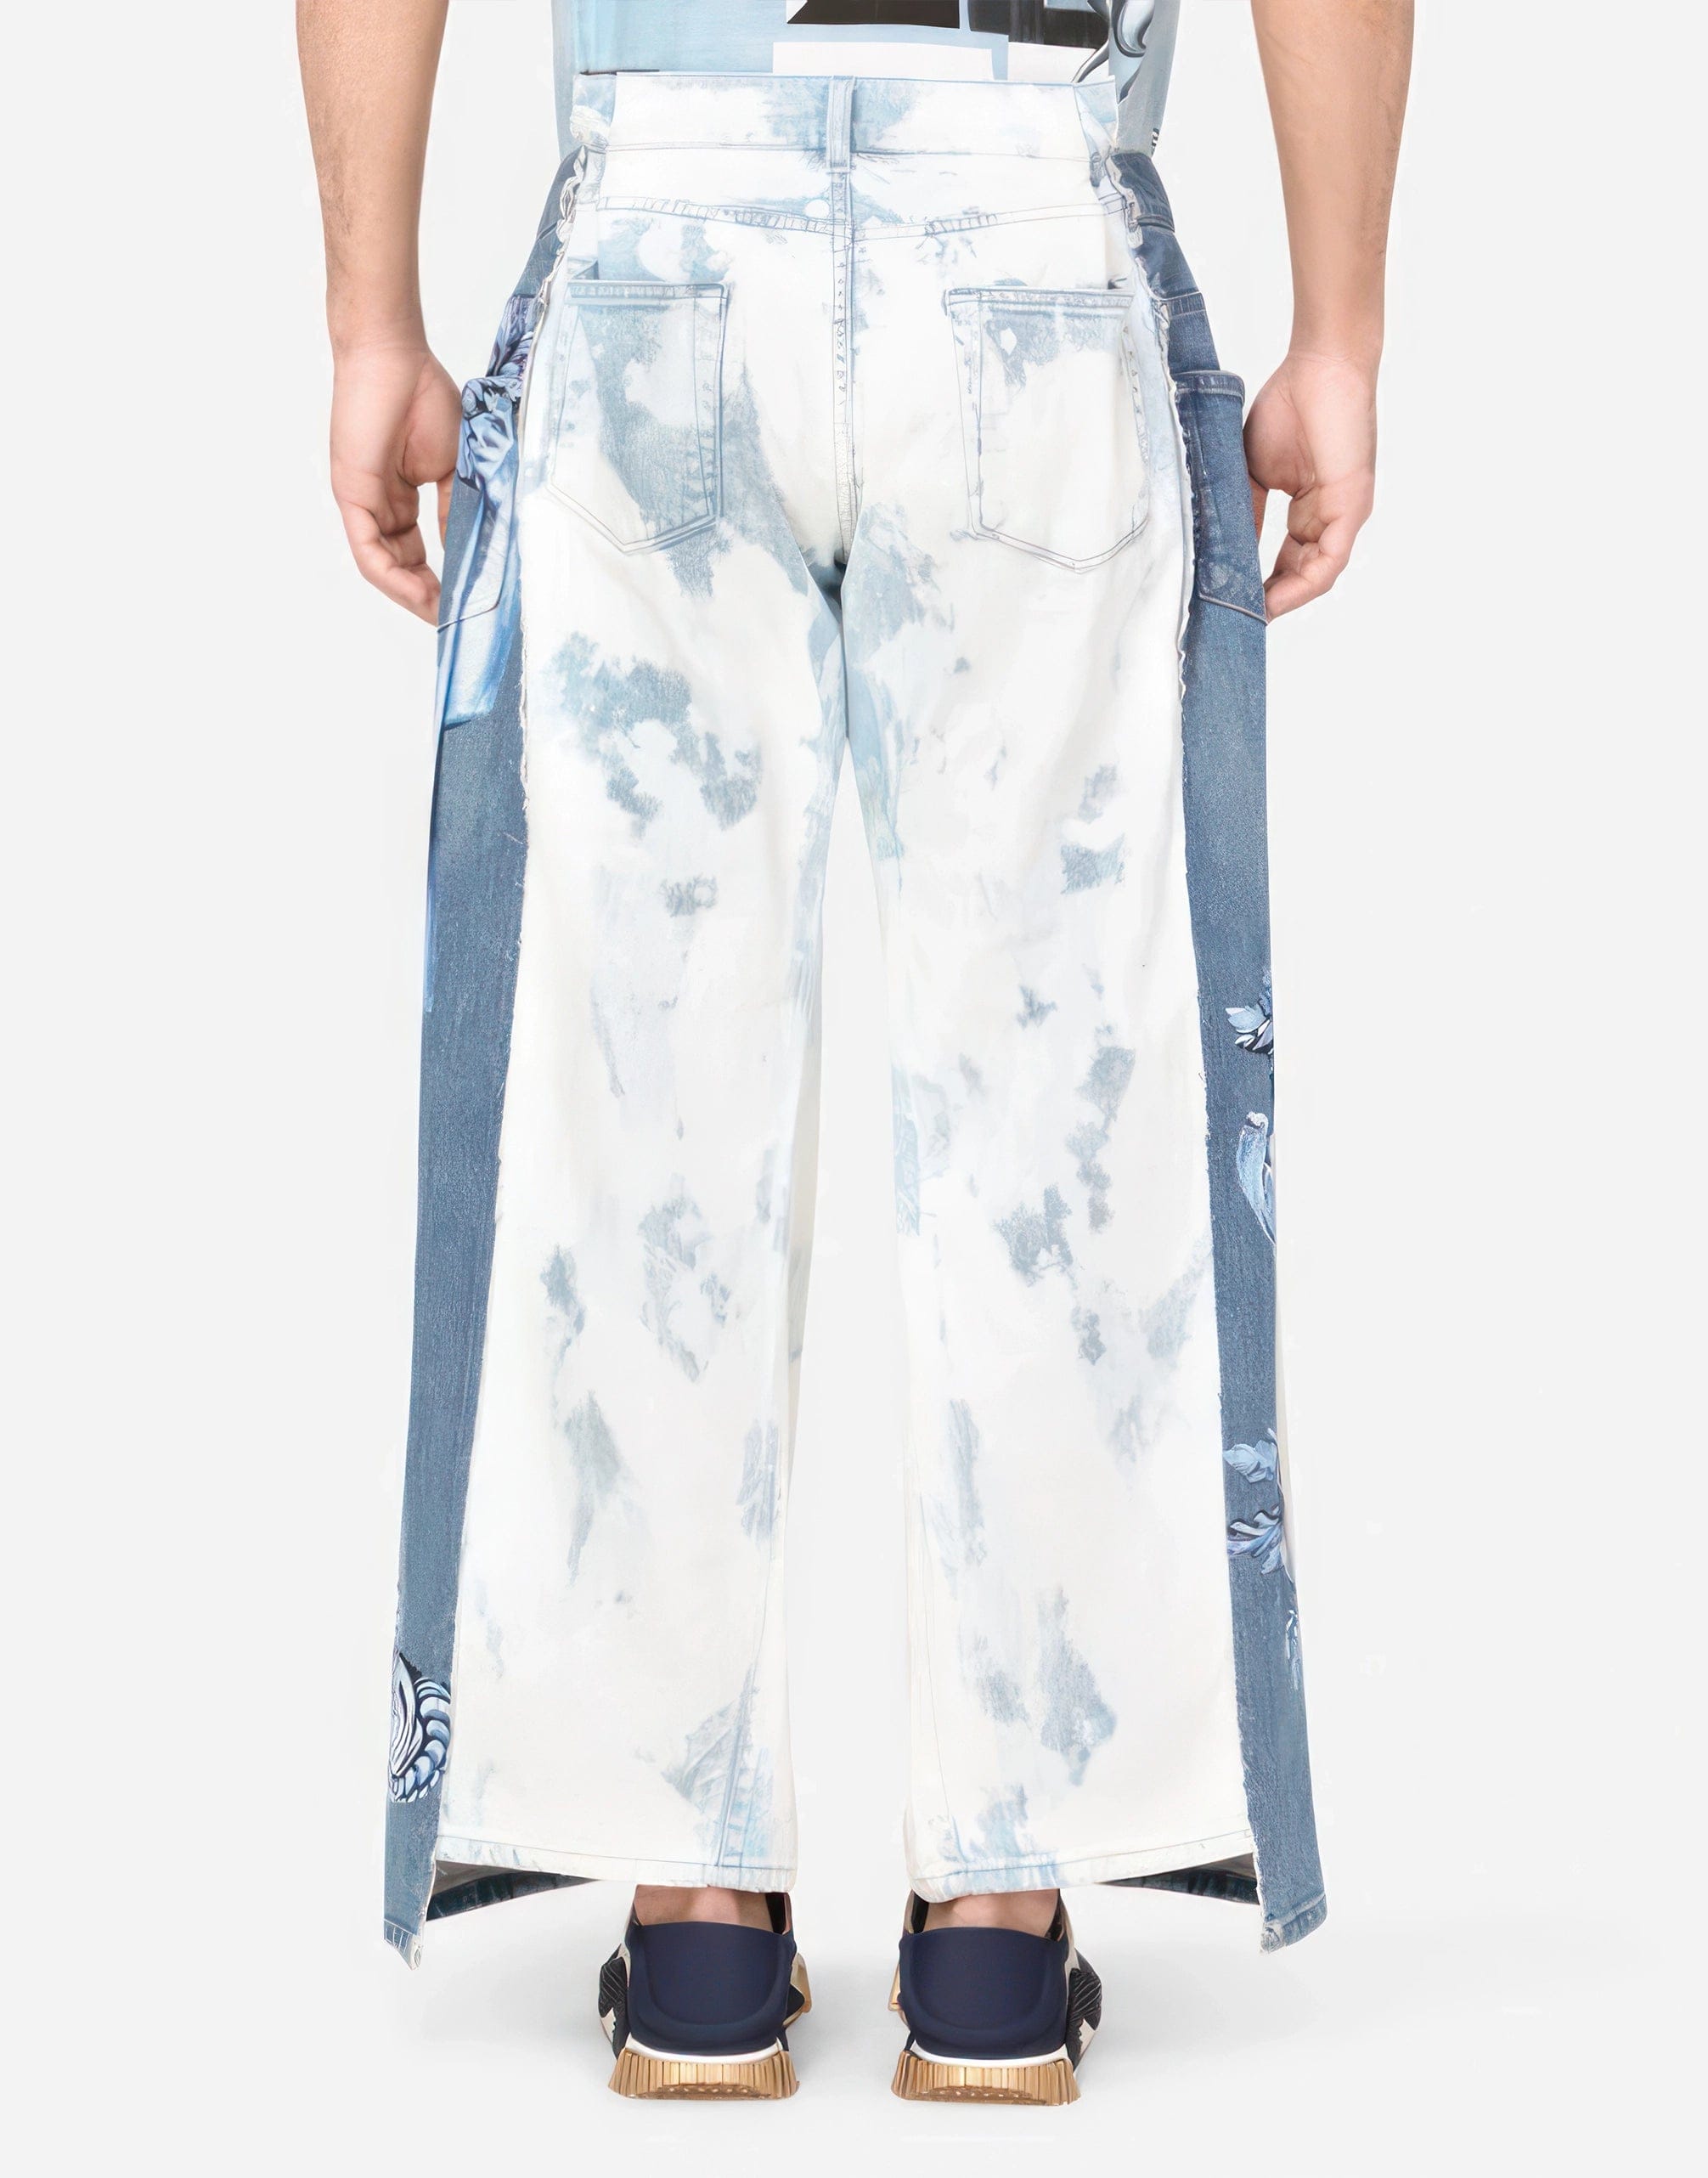 Dolce & Gabbana Mixed Loose-Fit Jeans